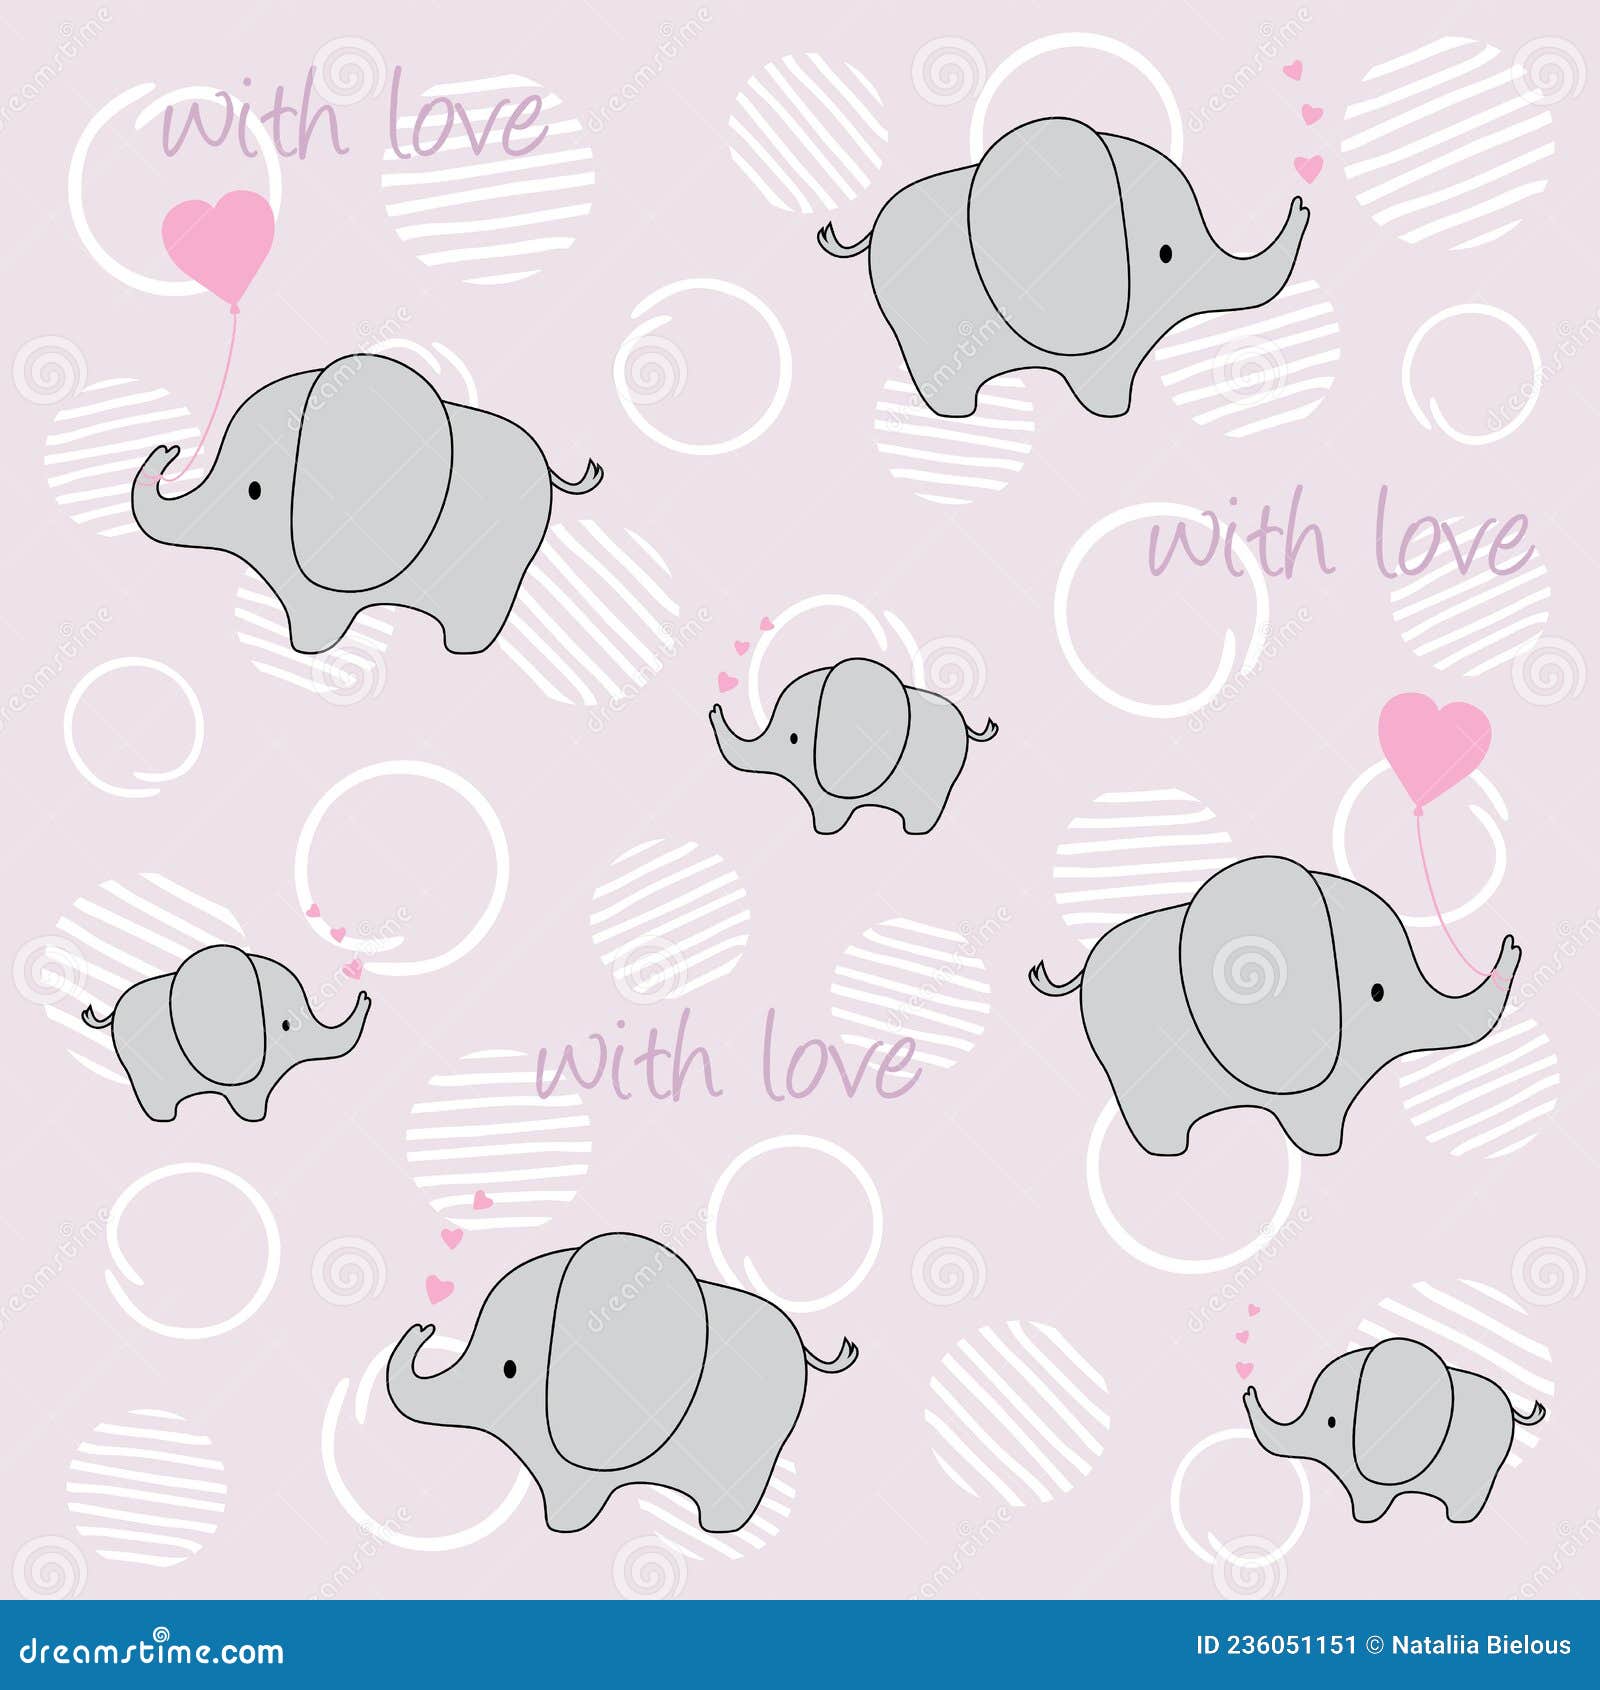 Cute Baby Elephants with Hearts and Balloons on a Decorative Background ...